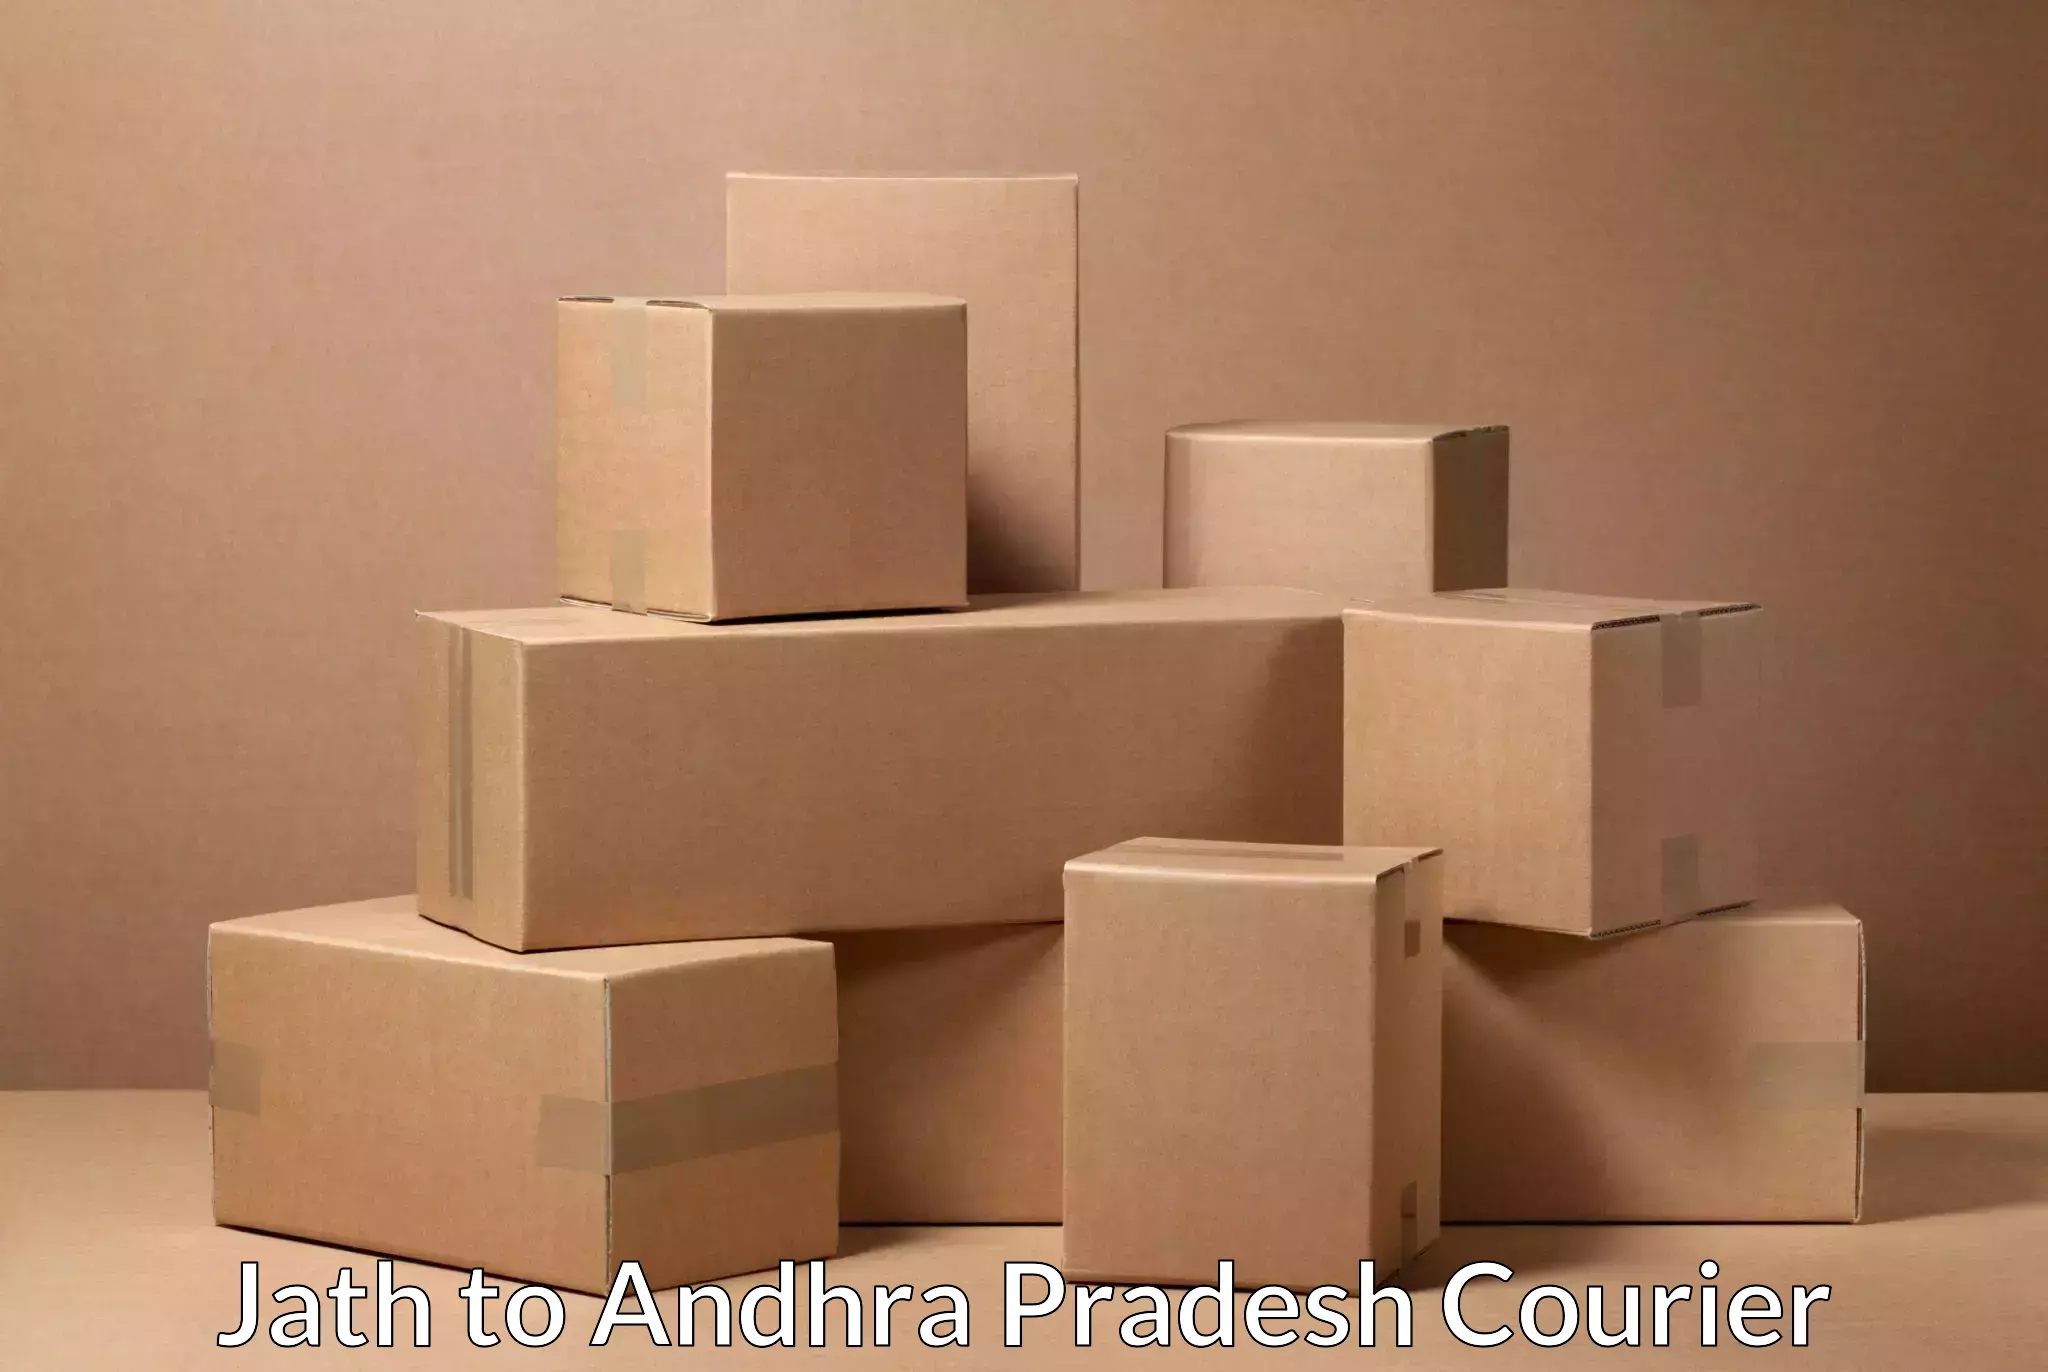 Cash on delivery service Jath to Andhra Pradesh